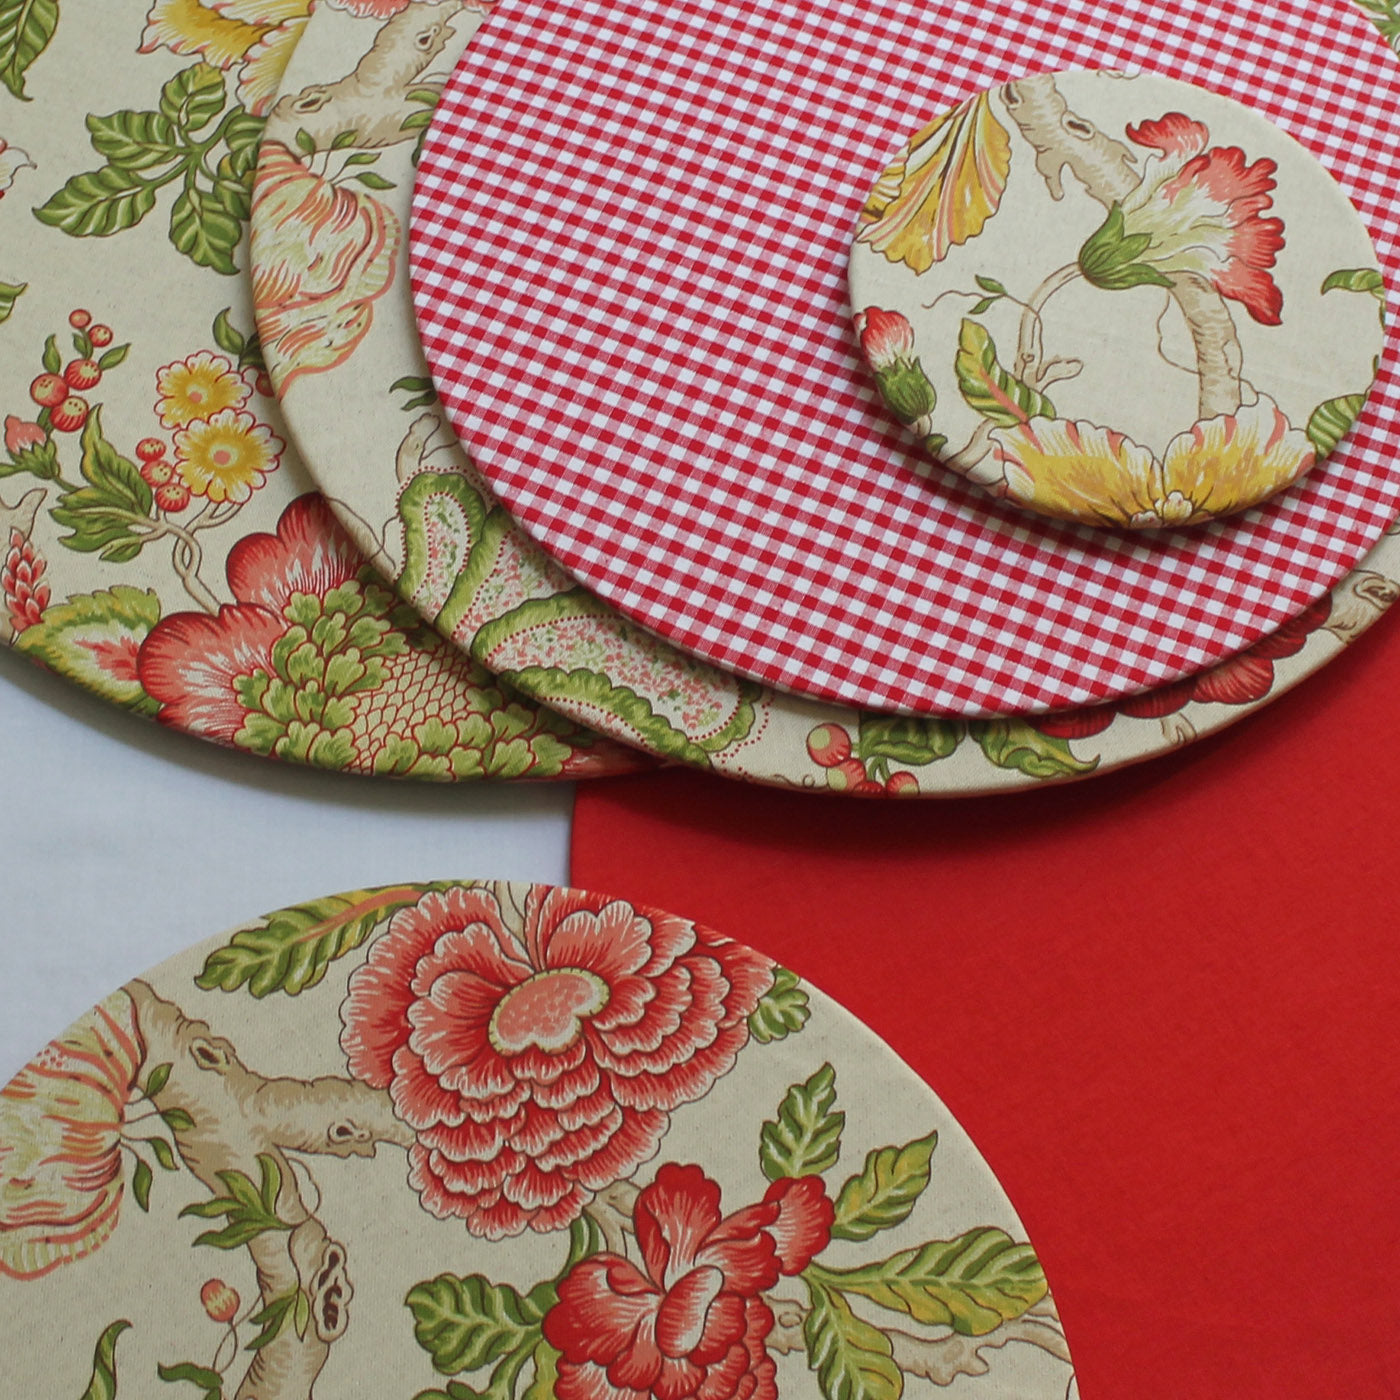 Set of 2 Cuffiette Extra-Small Round Floral Placemats #1 - Alternative view 2